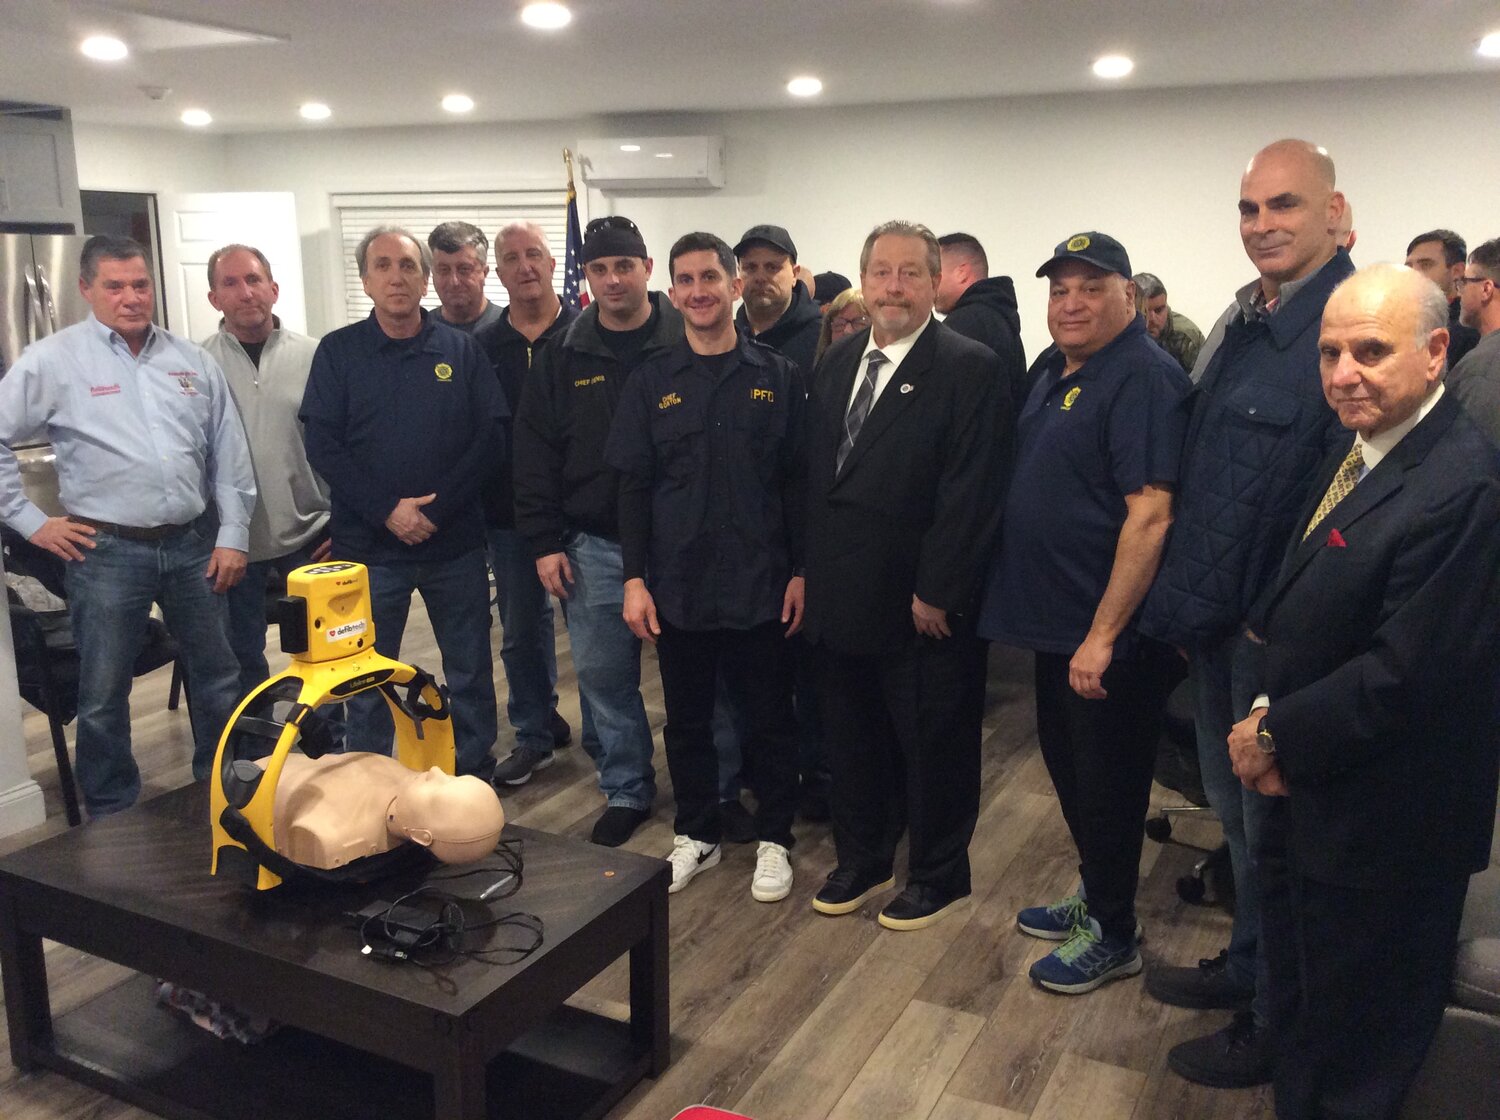 The Island Park Fire Department gathered with County Legislator Patrick Mullaney and Island Park village board members at the Barnum Island Fire District on Jan 31. for a presentation on using the new CPR equipment purchased by the fire district